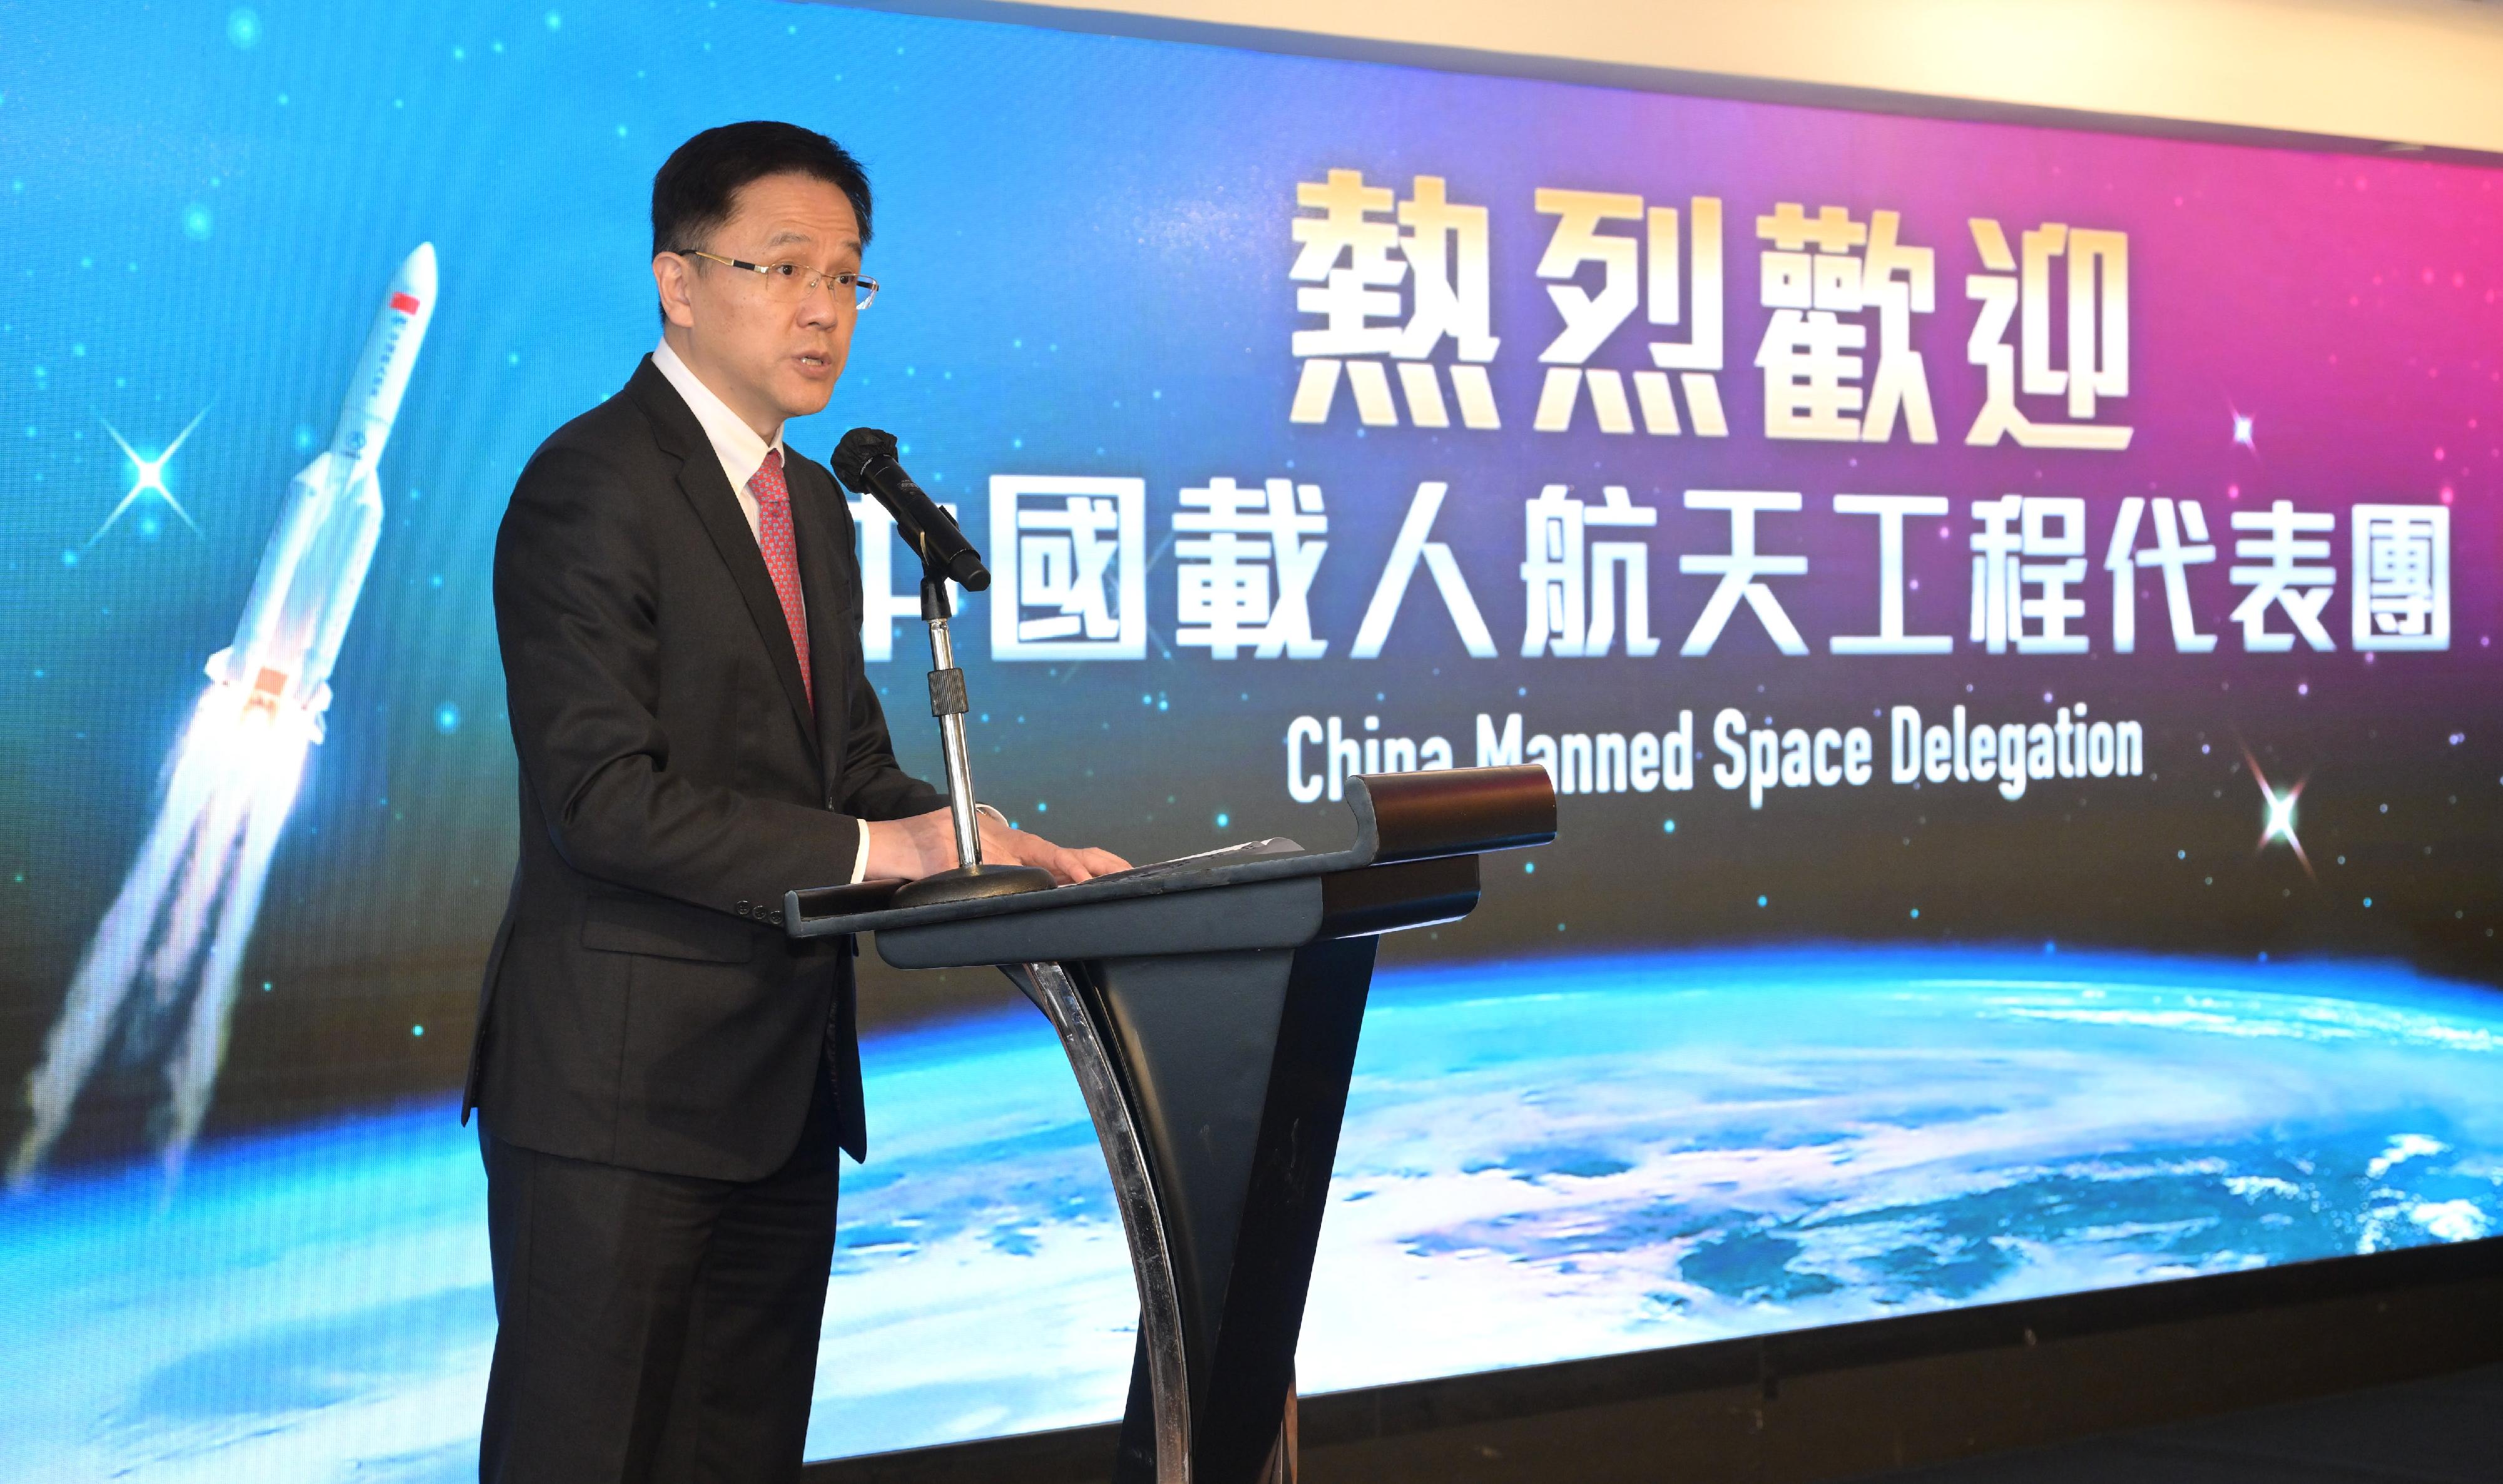 The China Manned Space delegation continued their visit to Hong Kong today (November 30) and attended a luncheon hosted by the Innovation, Technology and Industry Bureau to meet with the innovation and technology tertiary education sectors and exchange views. Photo shows the Secretary for Innovation, Technology and Industry, Professor Sun Dong, speaking at the luncheon.